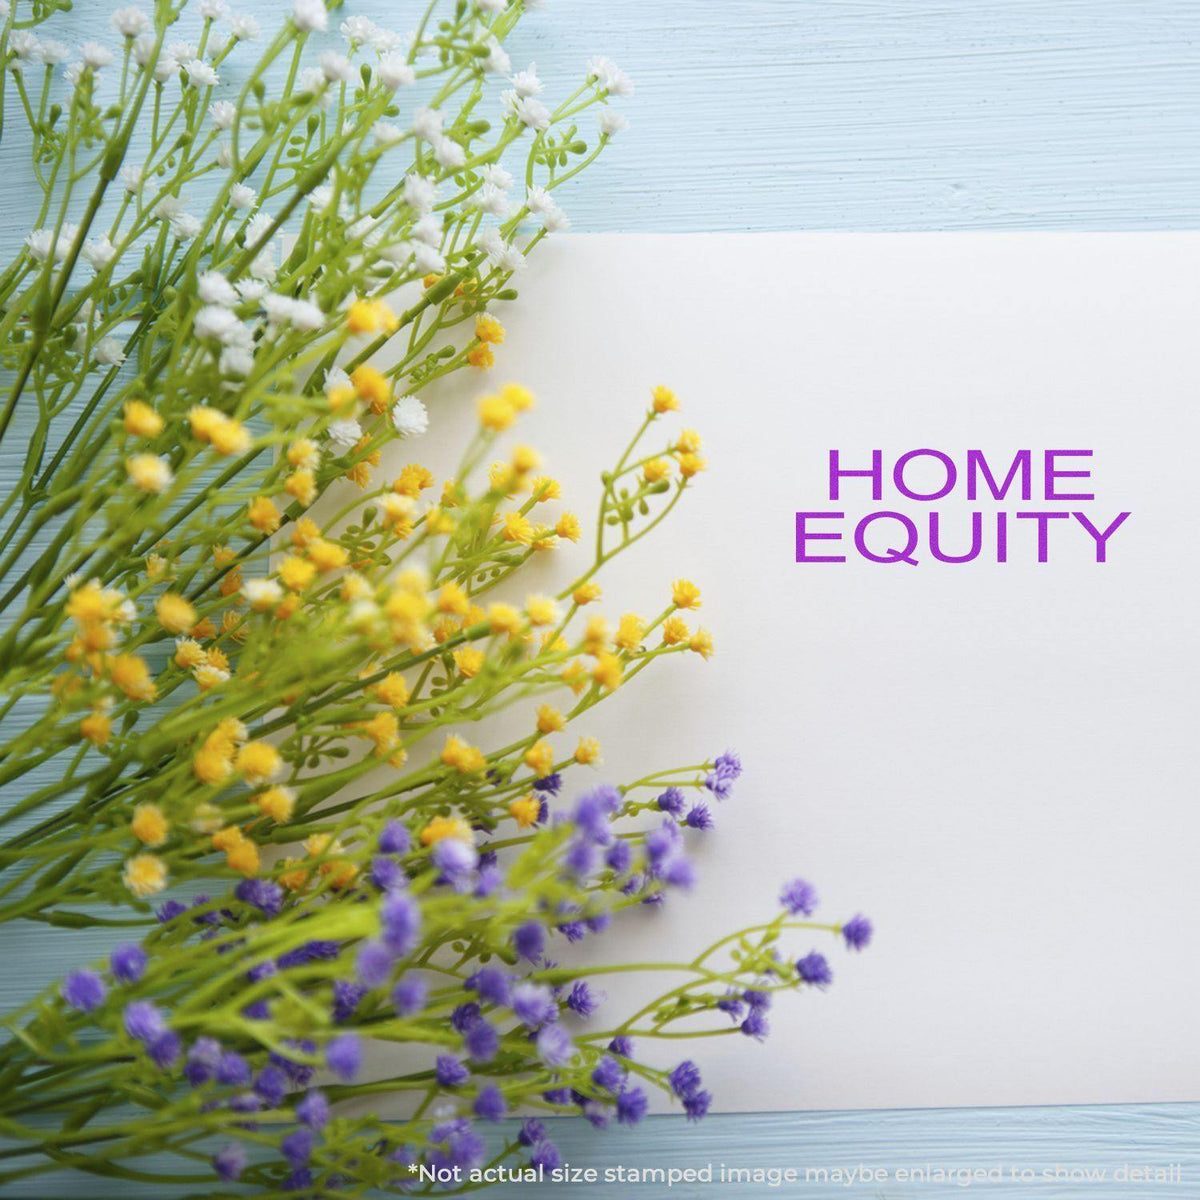 In Use Large Home Equity Rubber Stamp Image